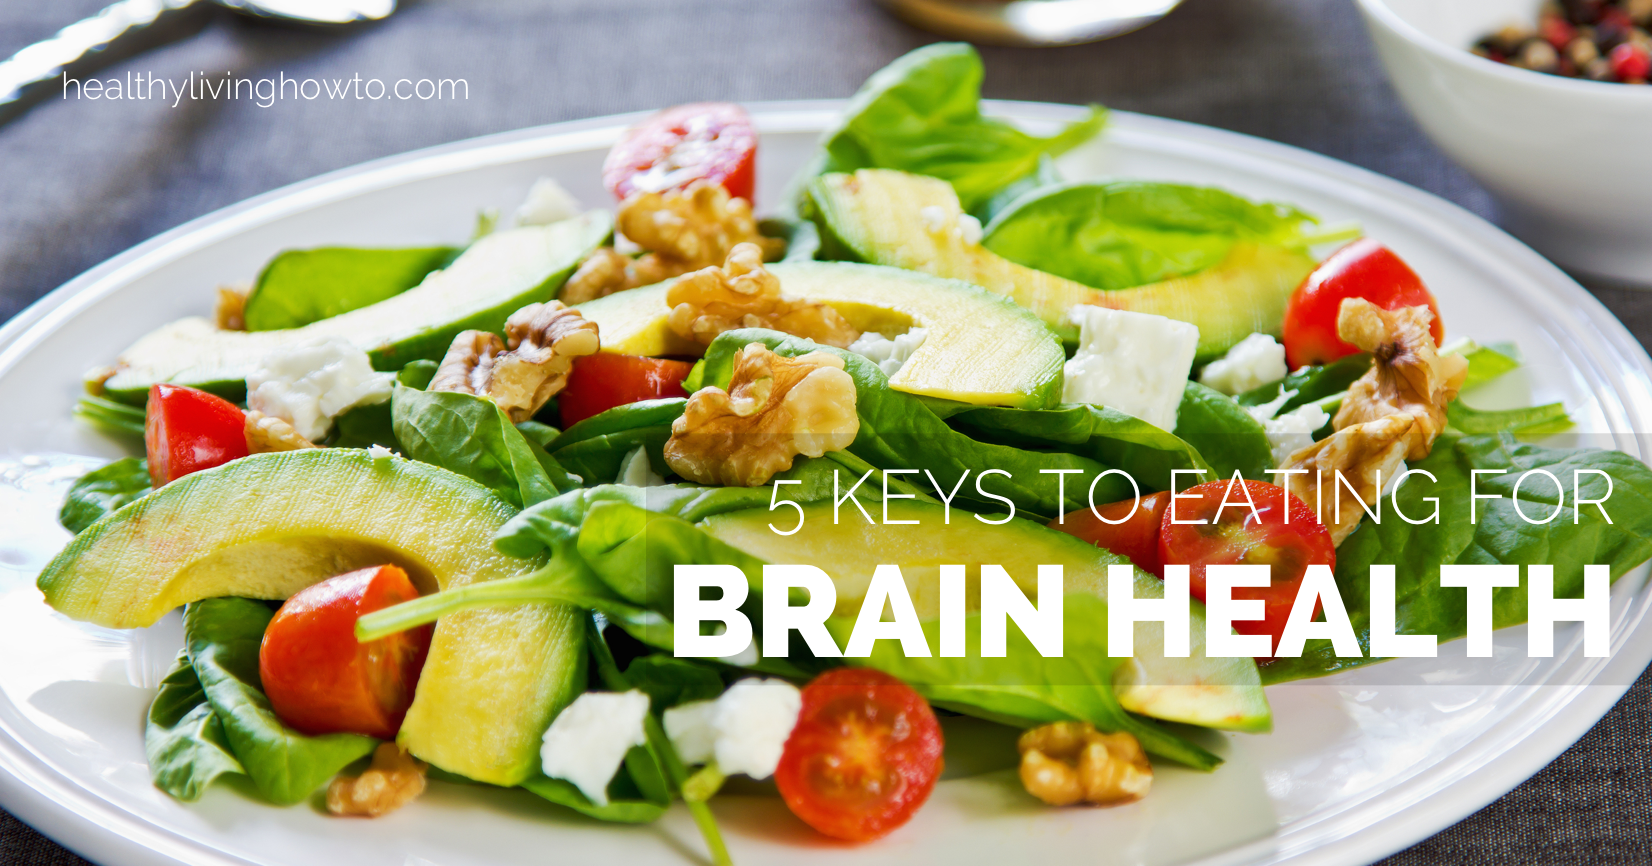 Eating for Brain Health | healthylivinghowto.com